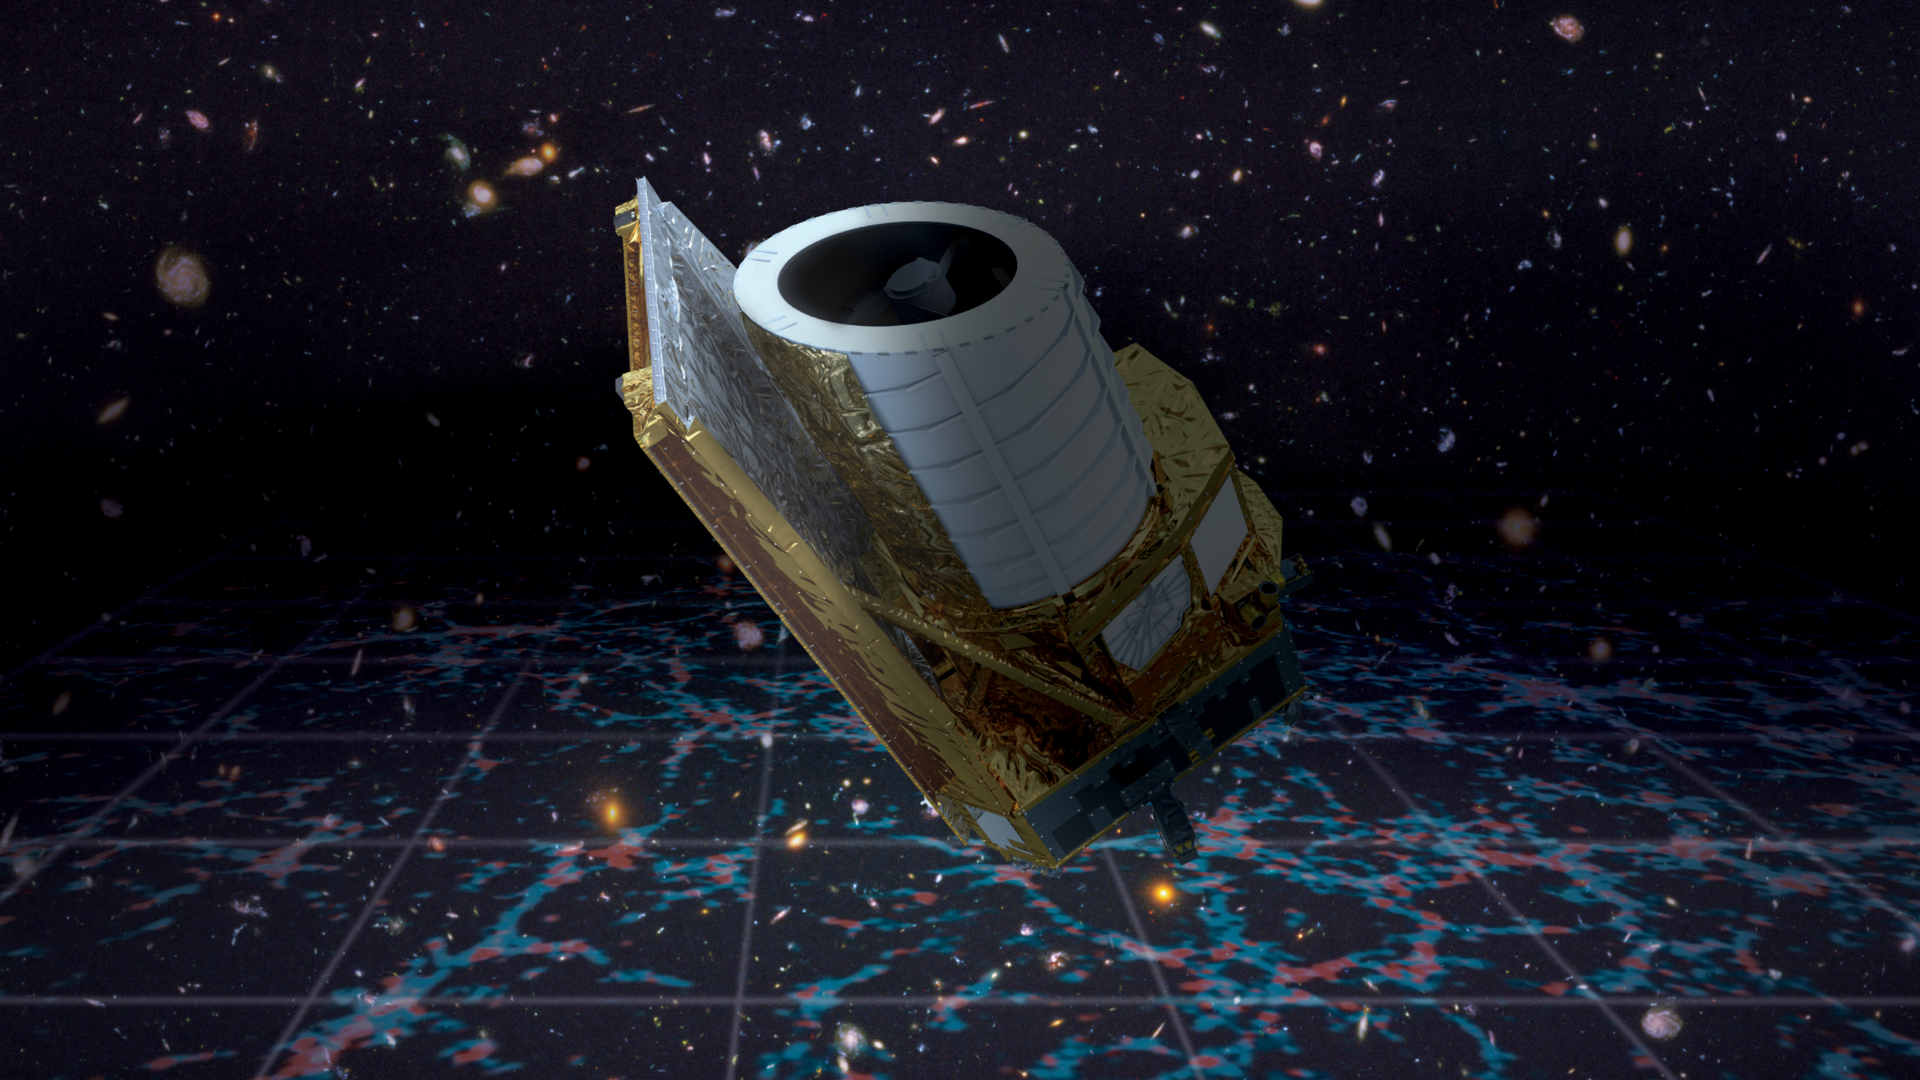 'Dark universe' telescope Euclid faces some setbacks during commissioning